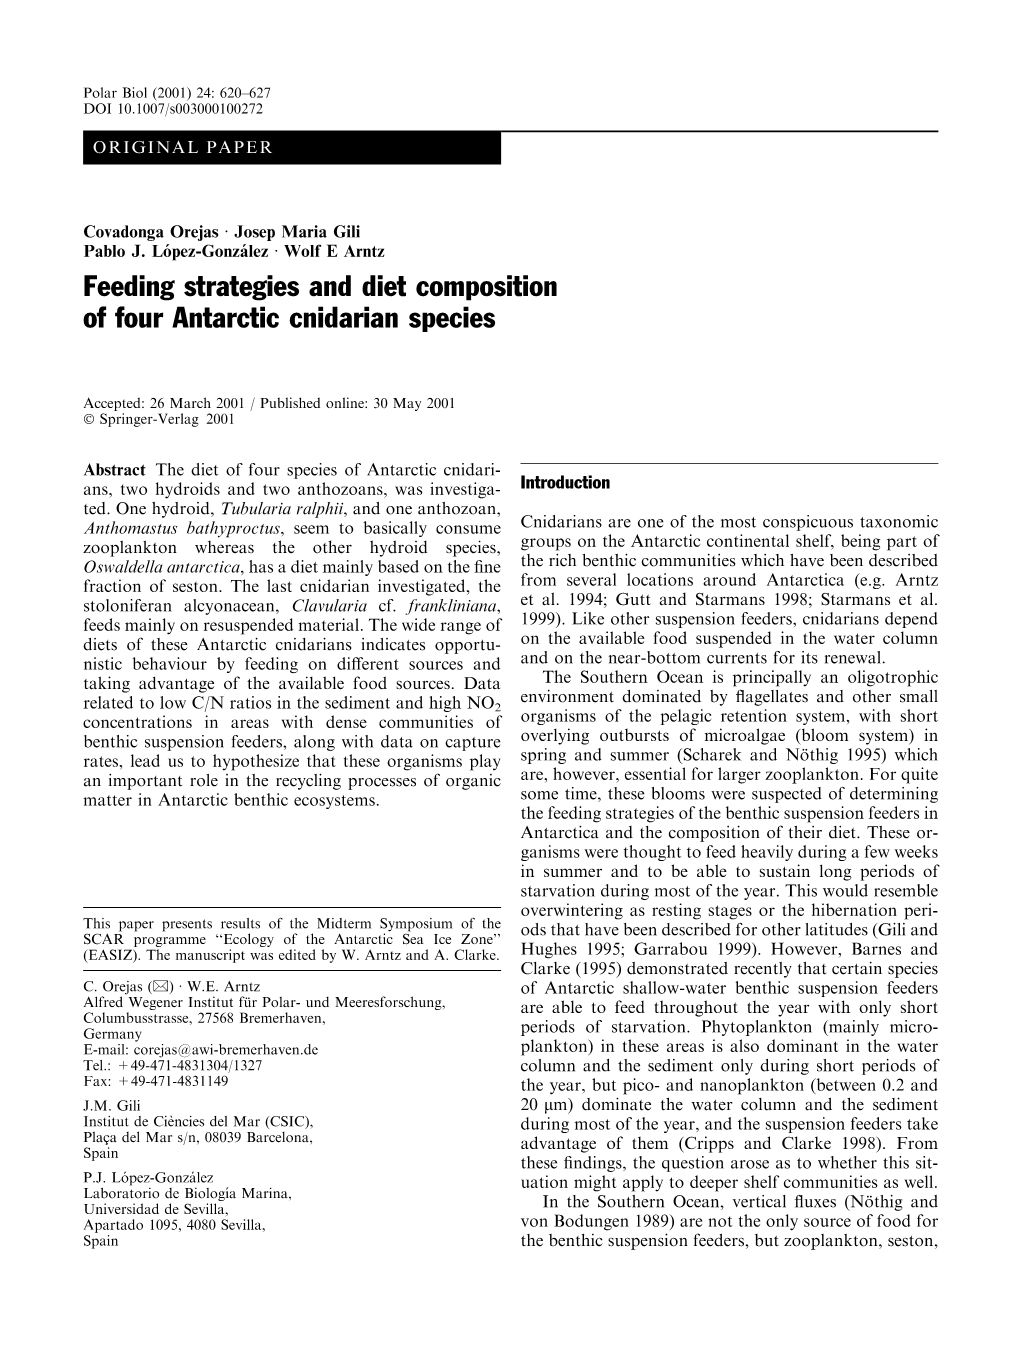 Feeding Strategies and Diet Composition of Four Antarctic Cnidarian Species